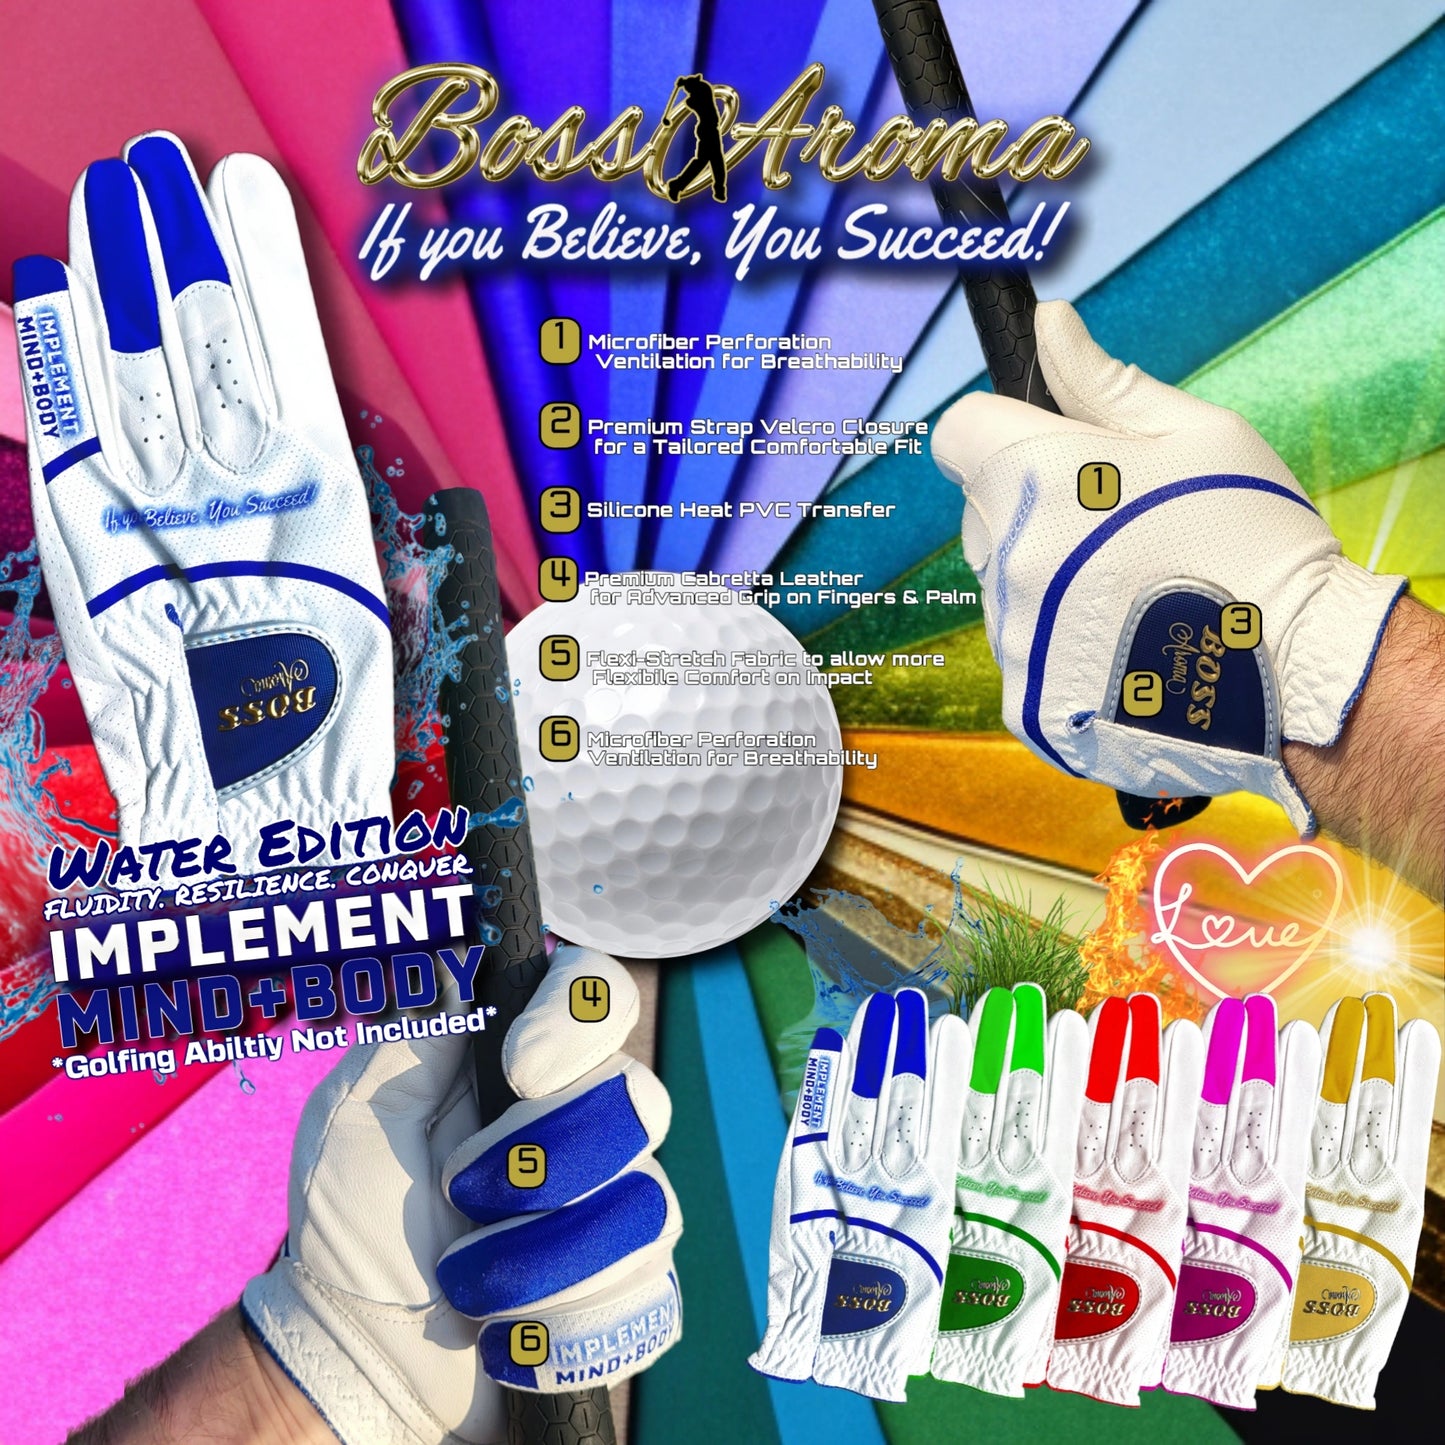 BossAroma IMPLEMENT Mind + Body Golf Glove (Water Edition)